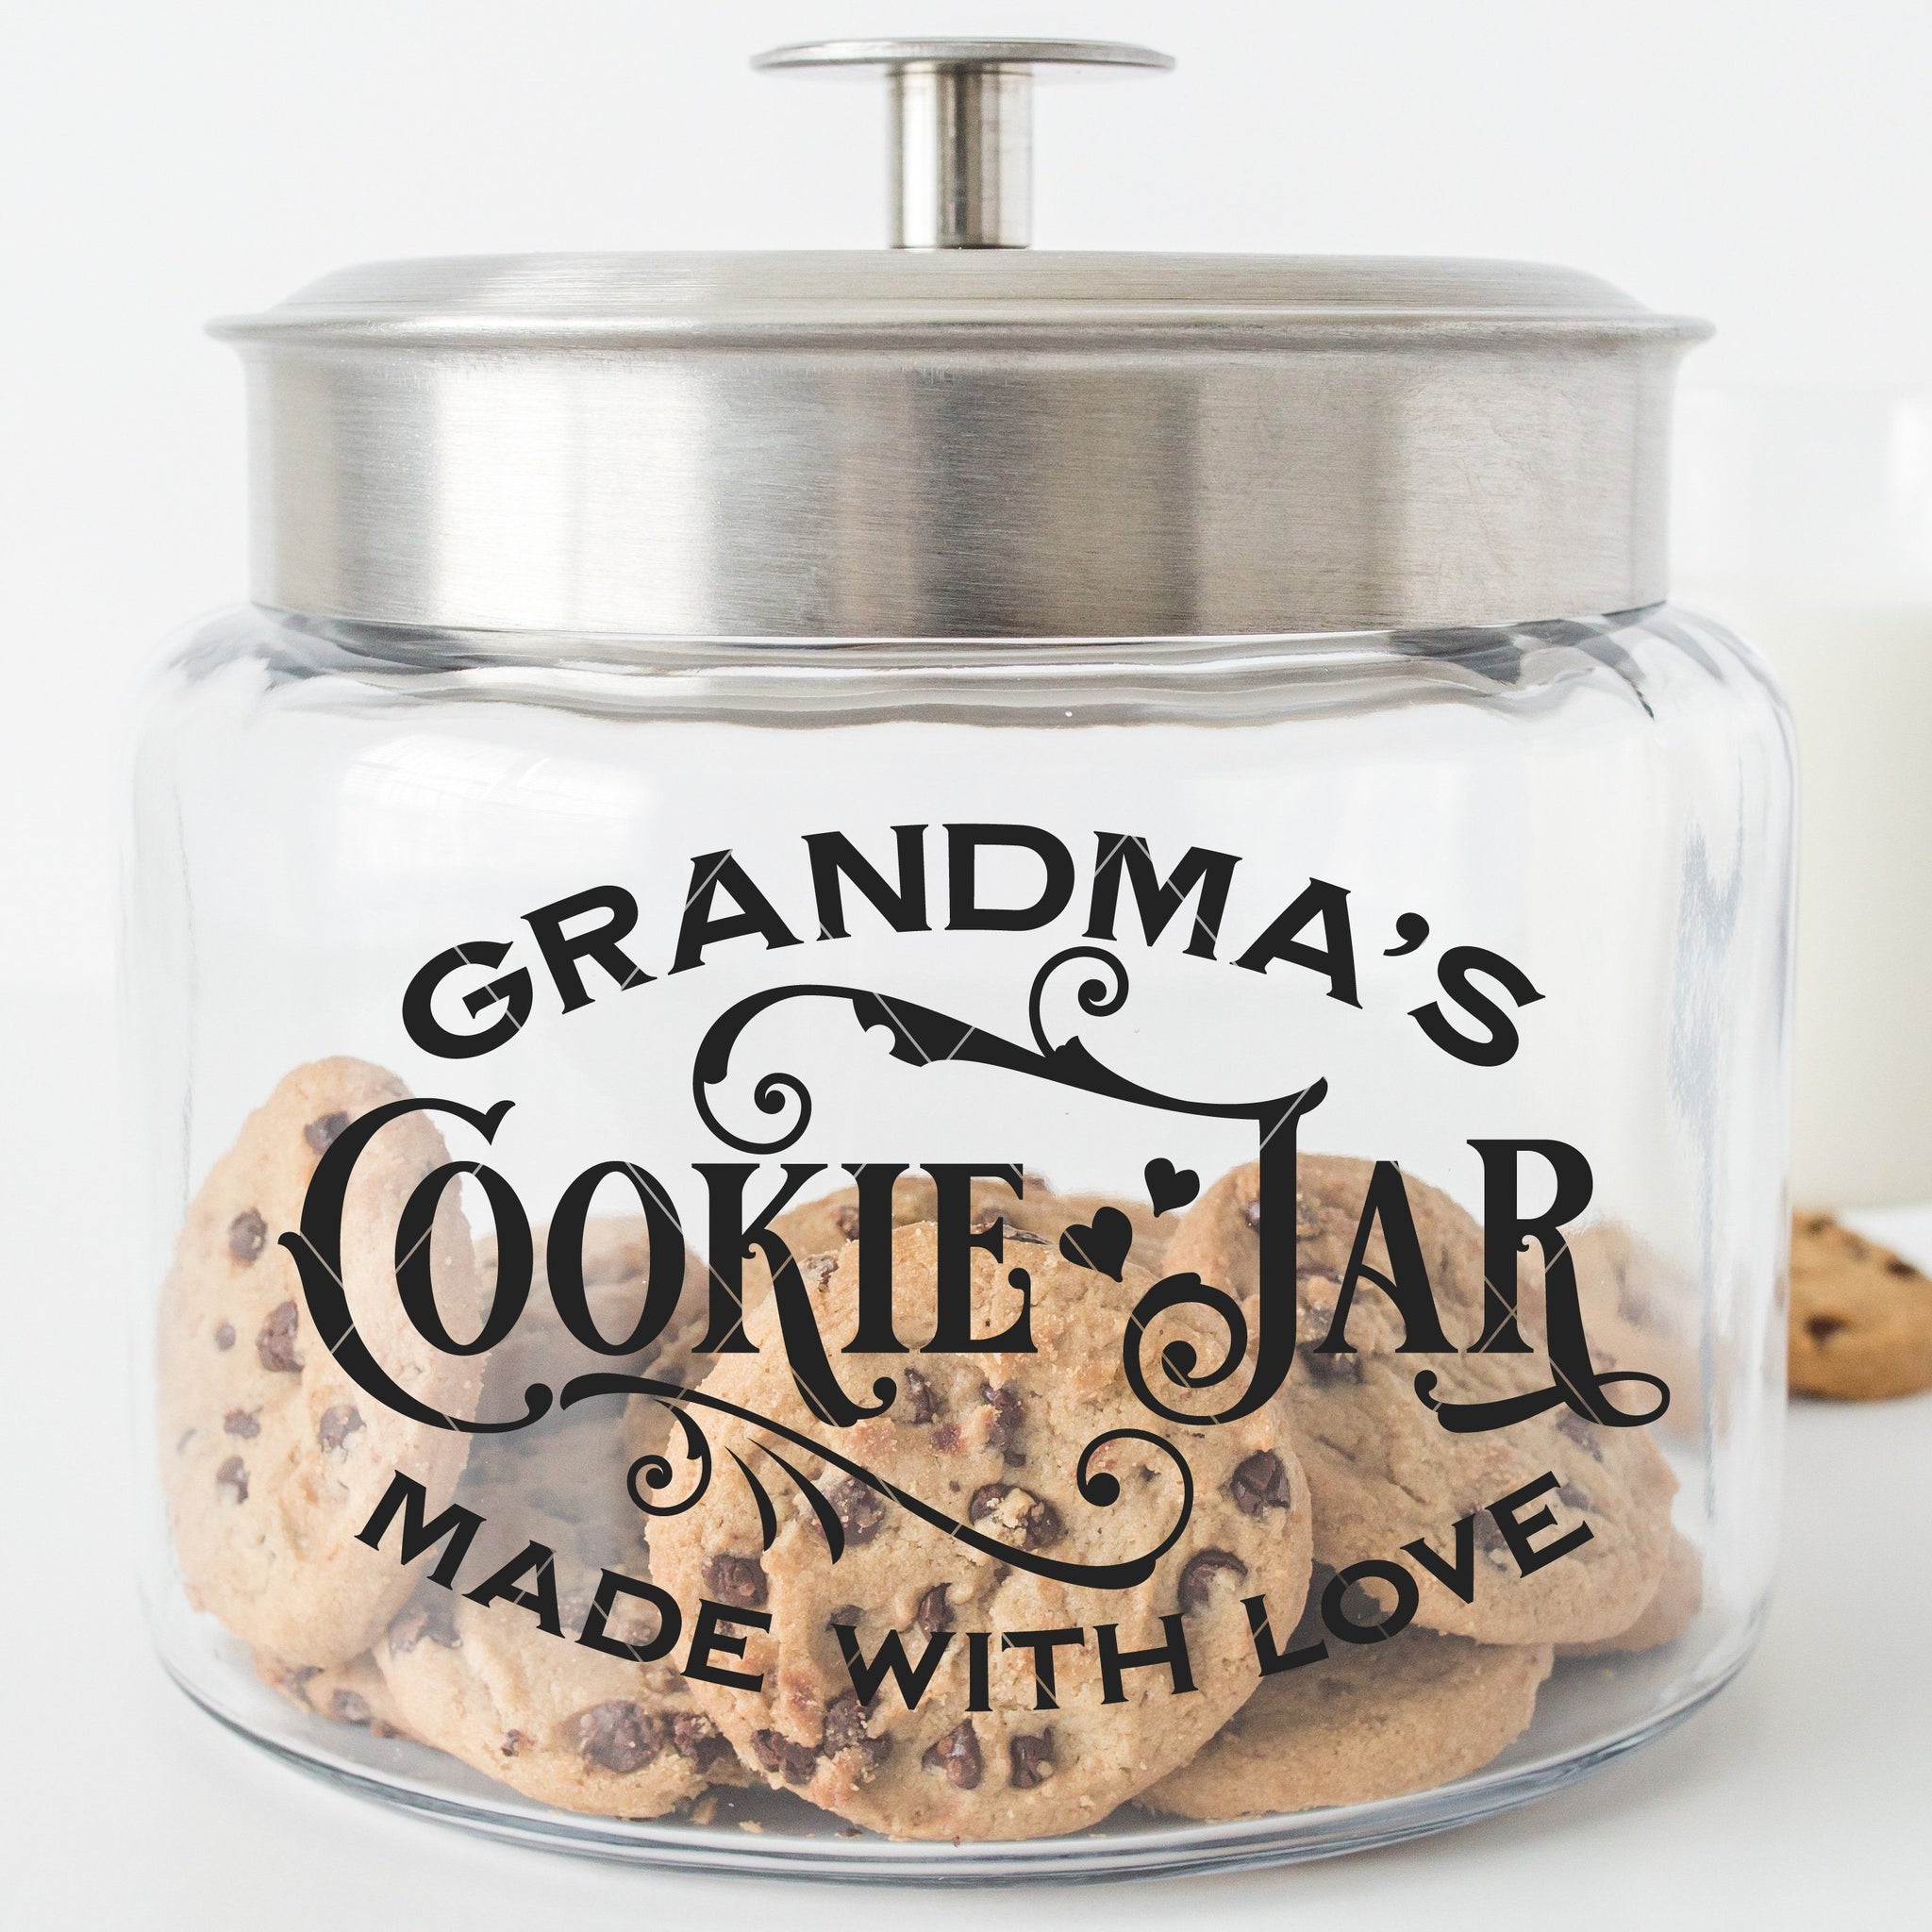 Classic Dad's Cookie Company Cookie Jar